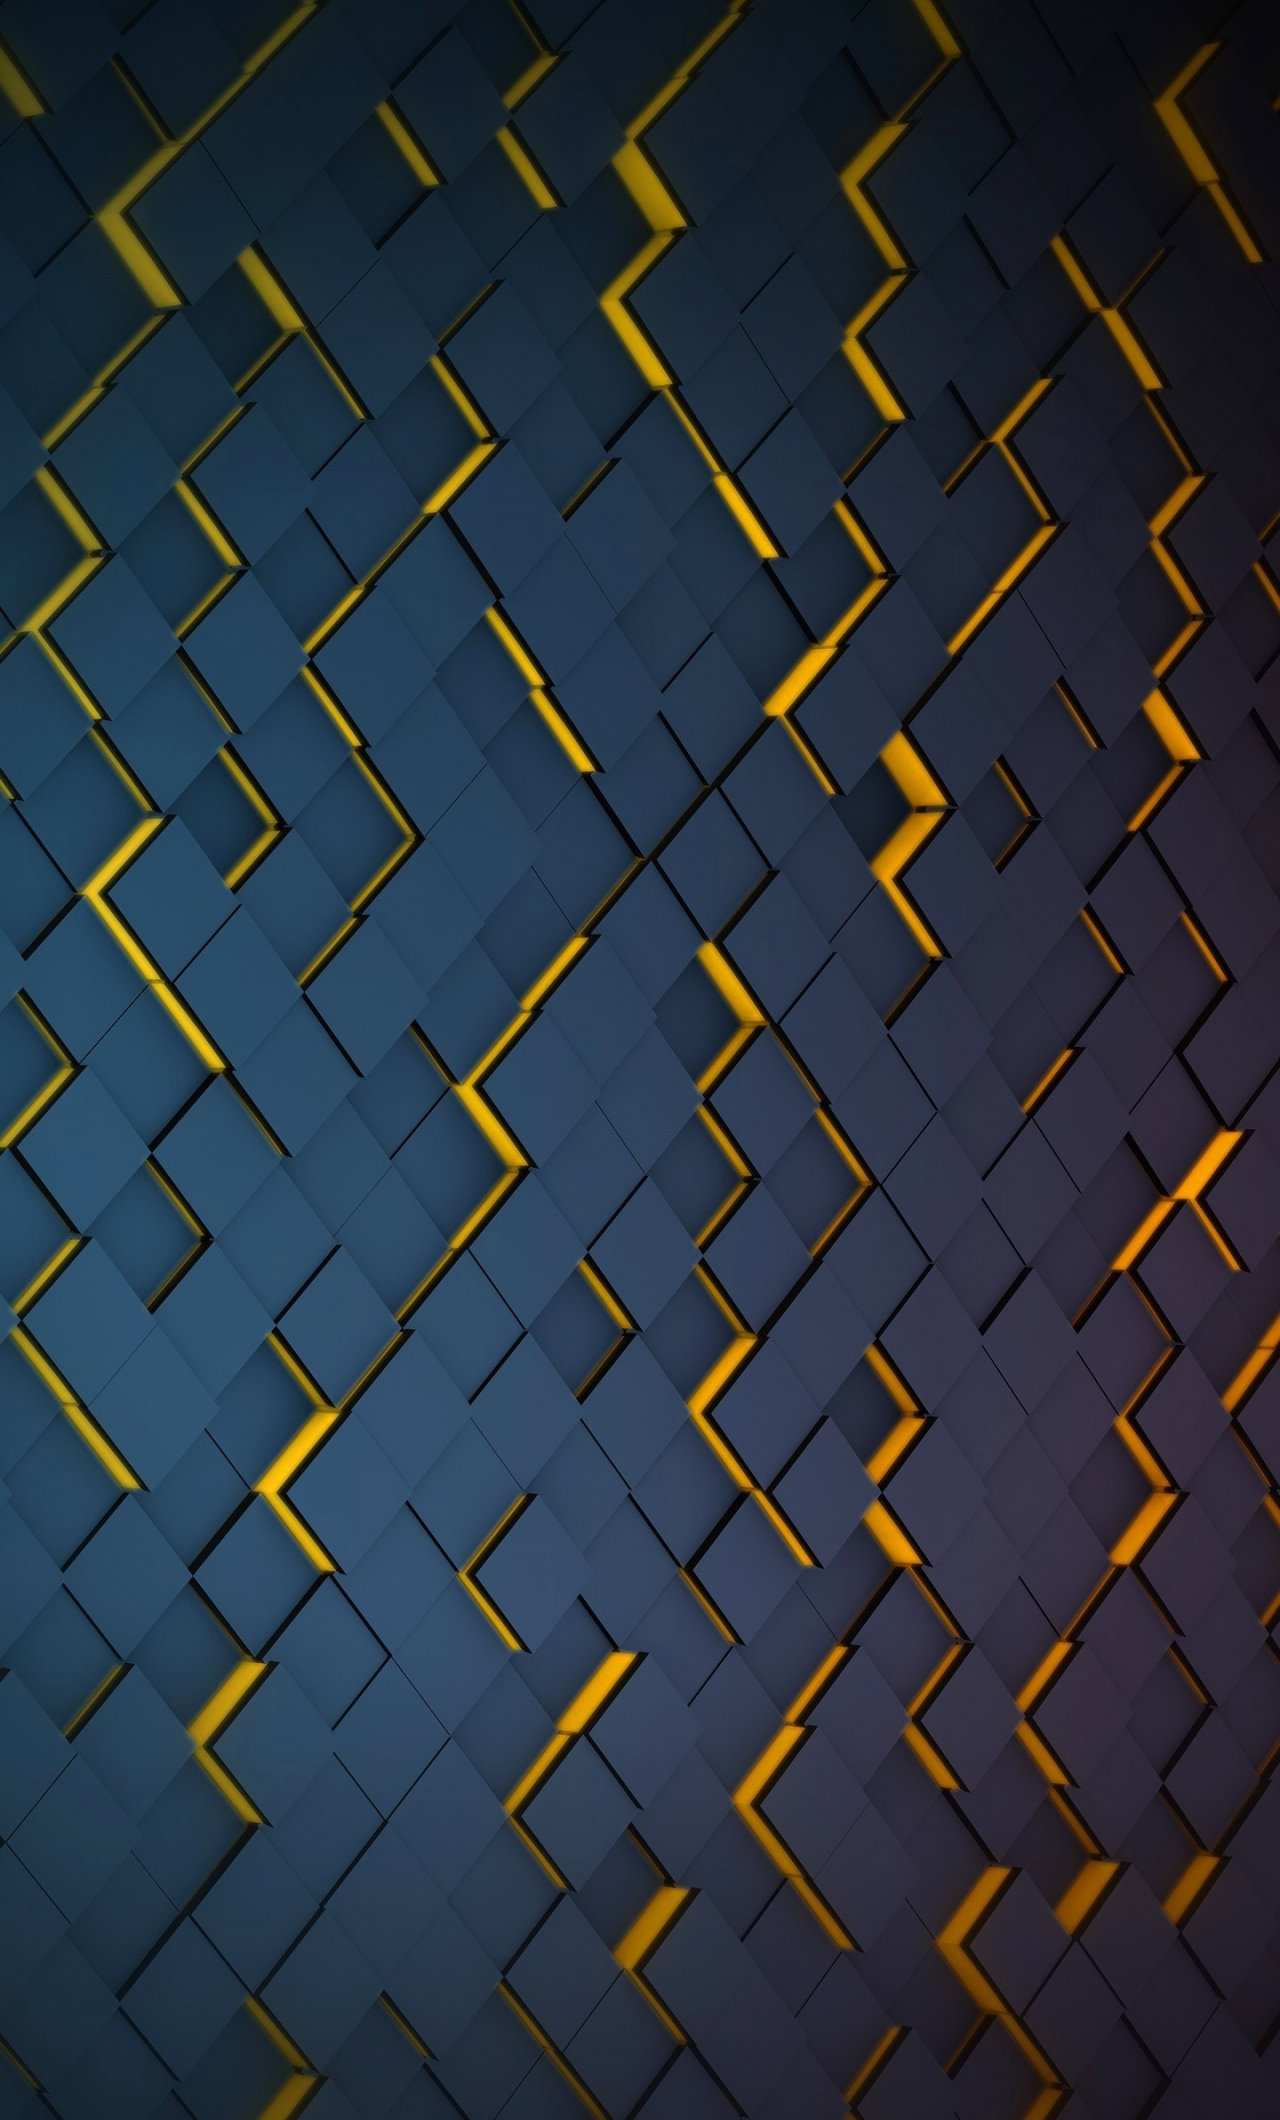 iPhone6papers.com | iPhone 6 wallpaper | vs21-paint-abstract-background-htc- yellow-blue-pattern